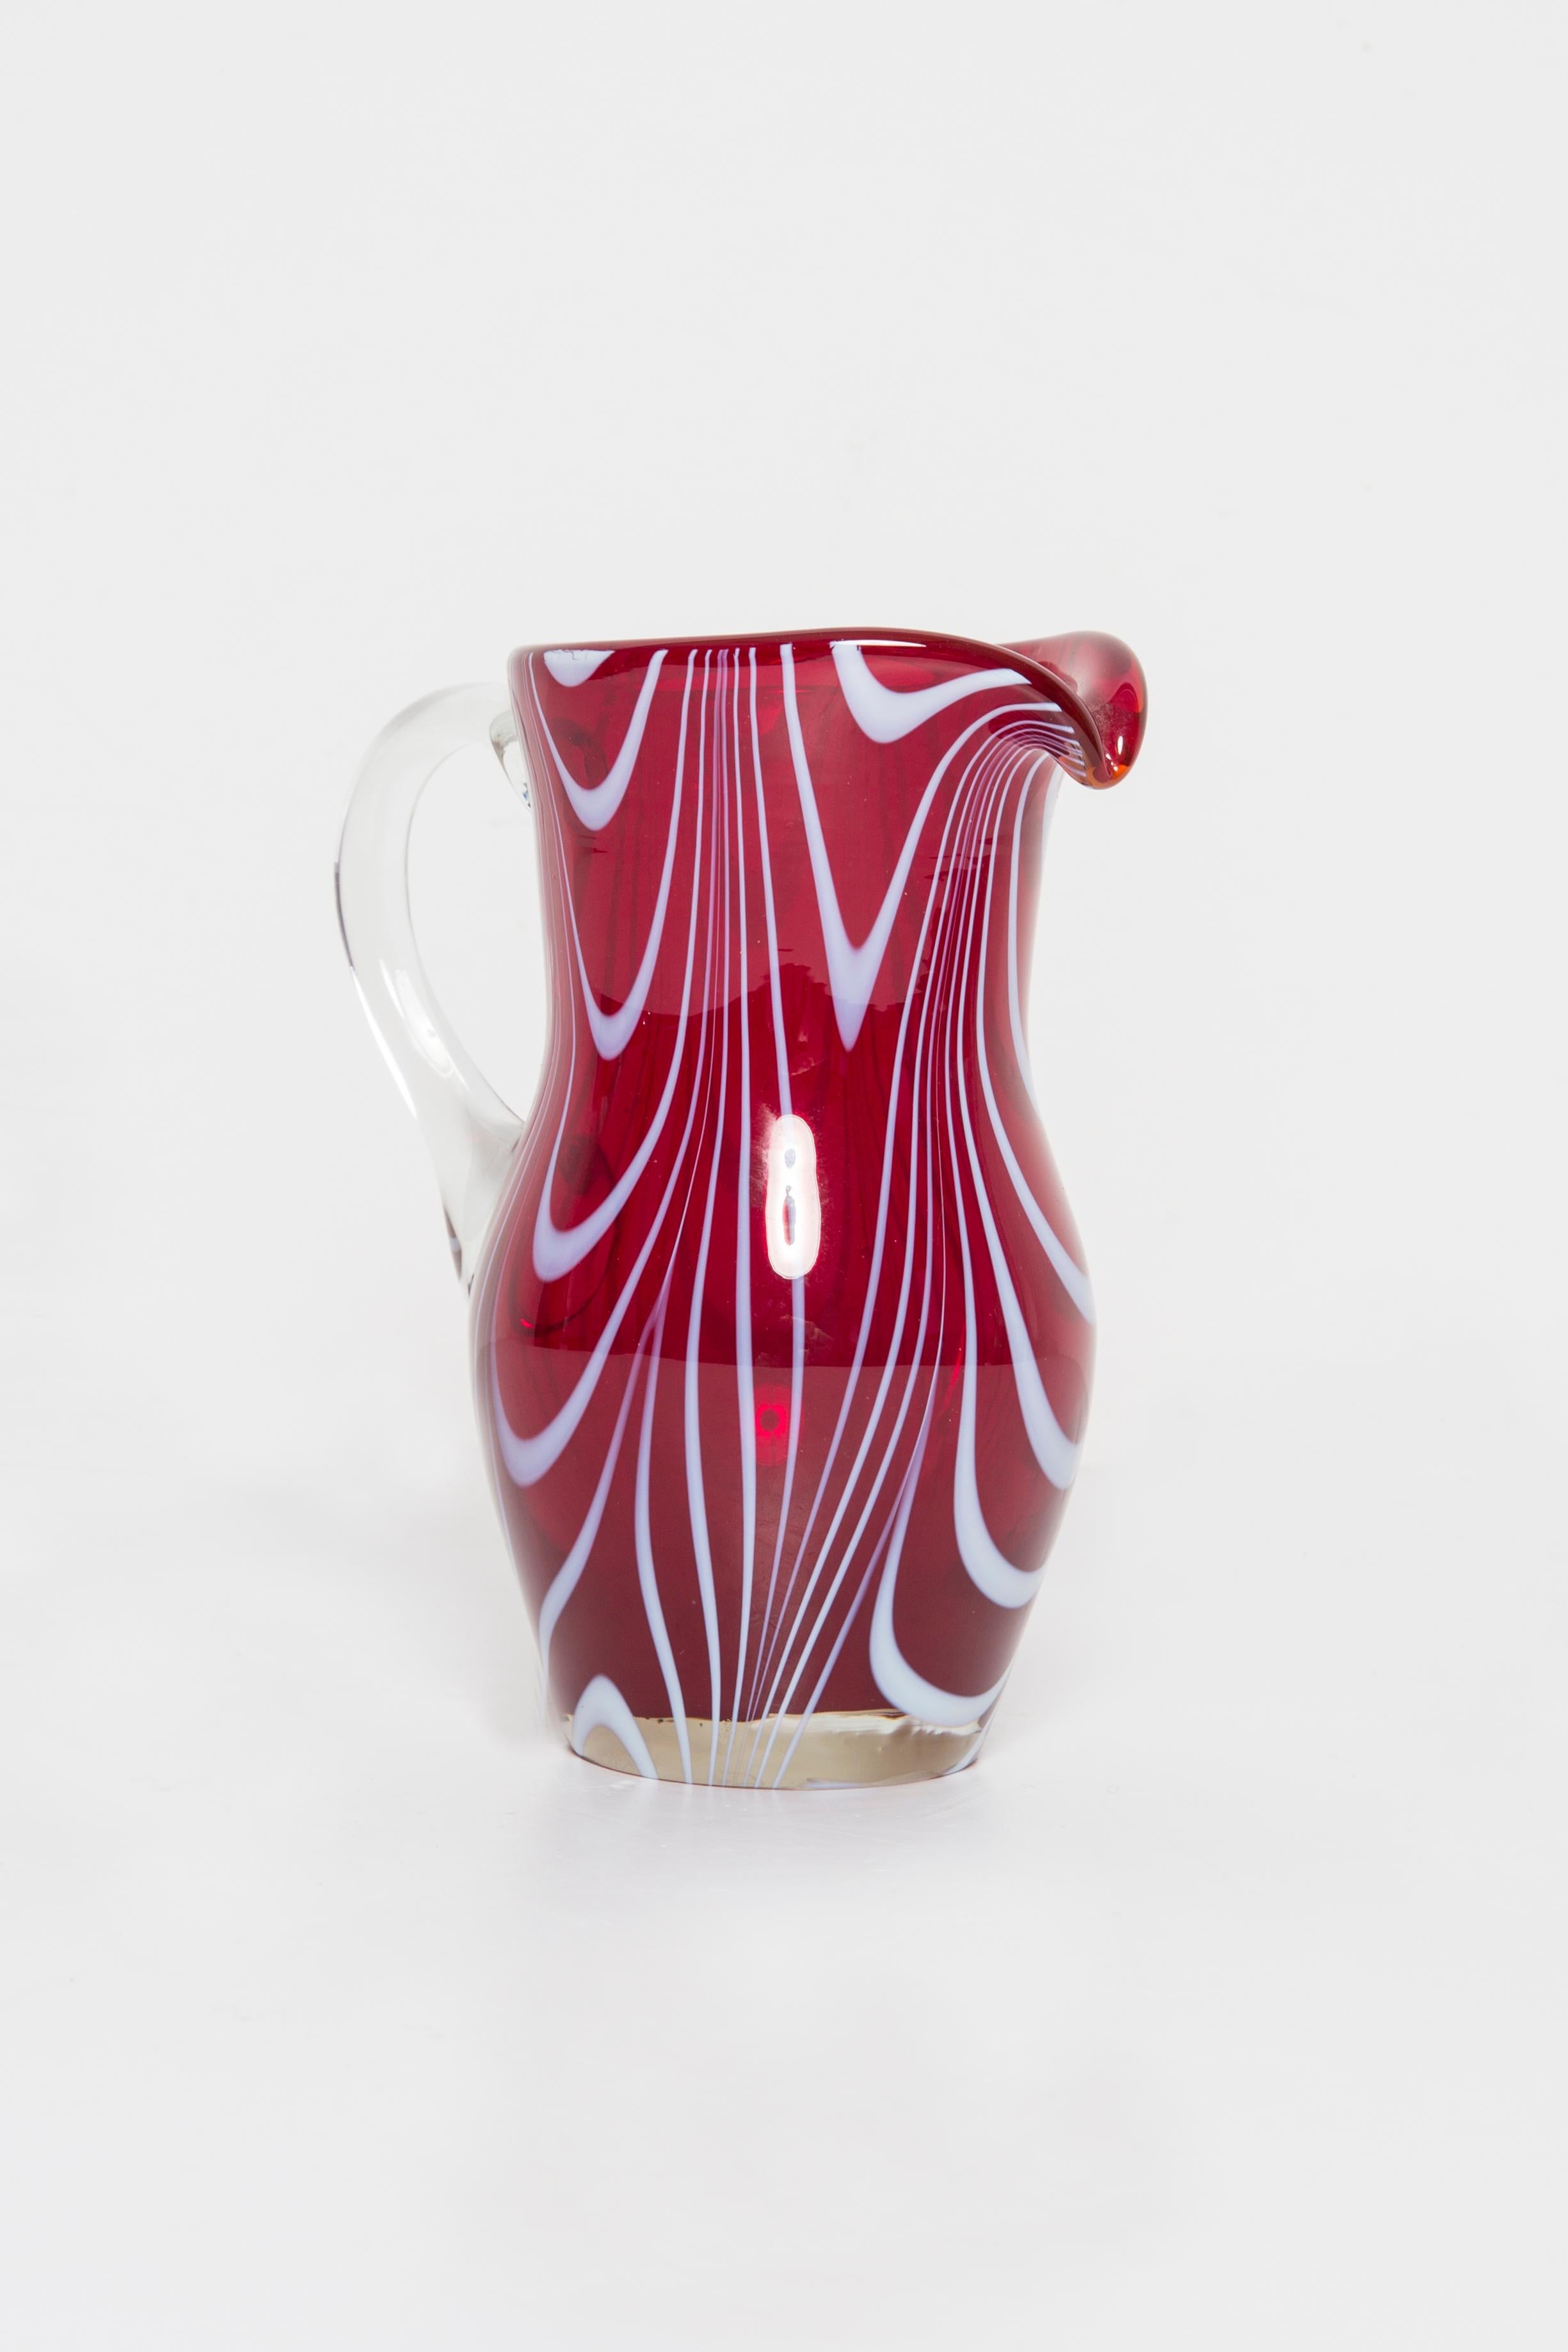 Glass Mid Century Vintage Dark Red Small Vase, Europe, 1960s For Sale